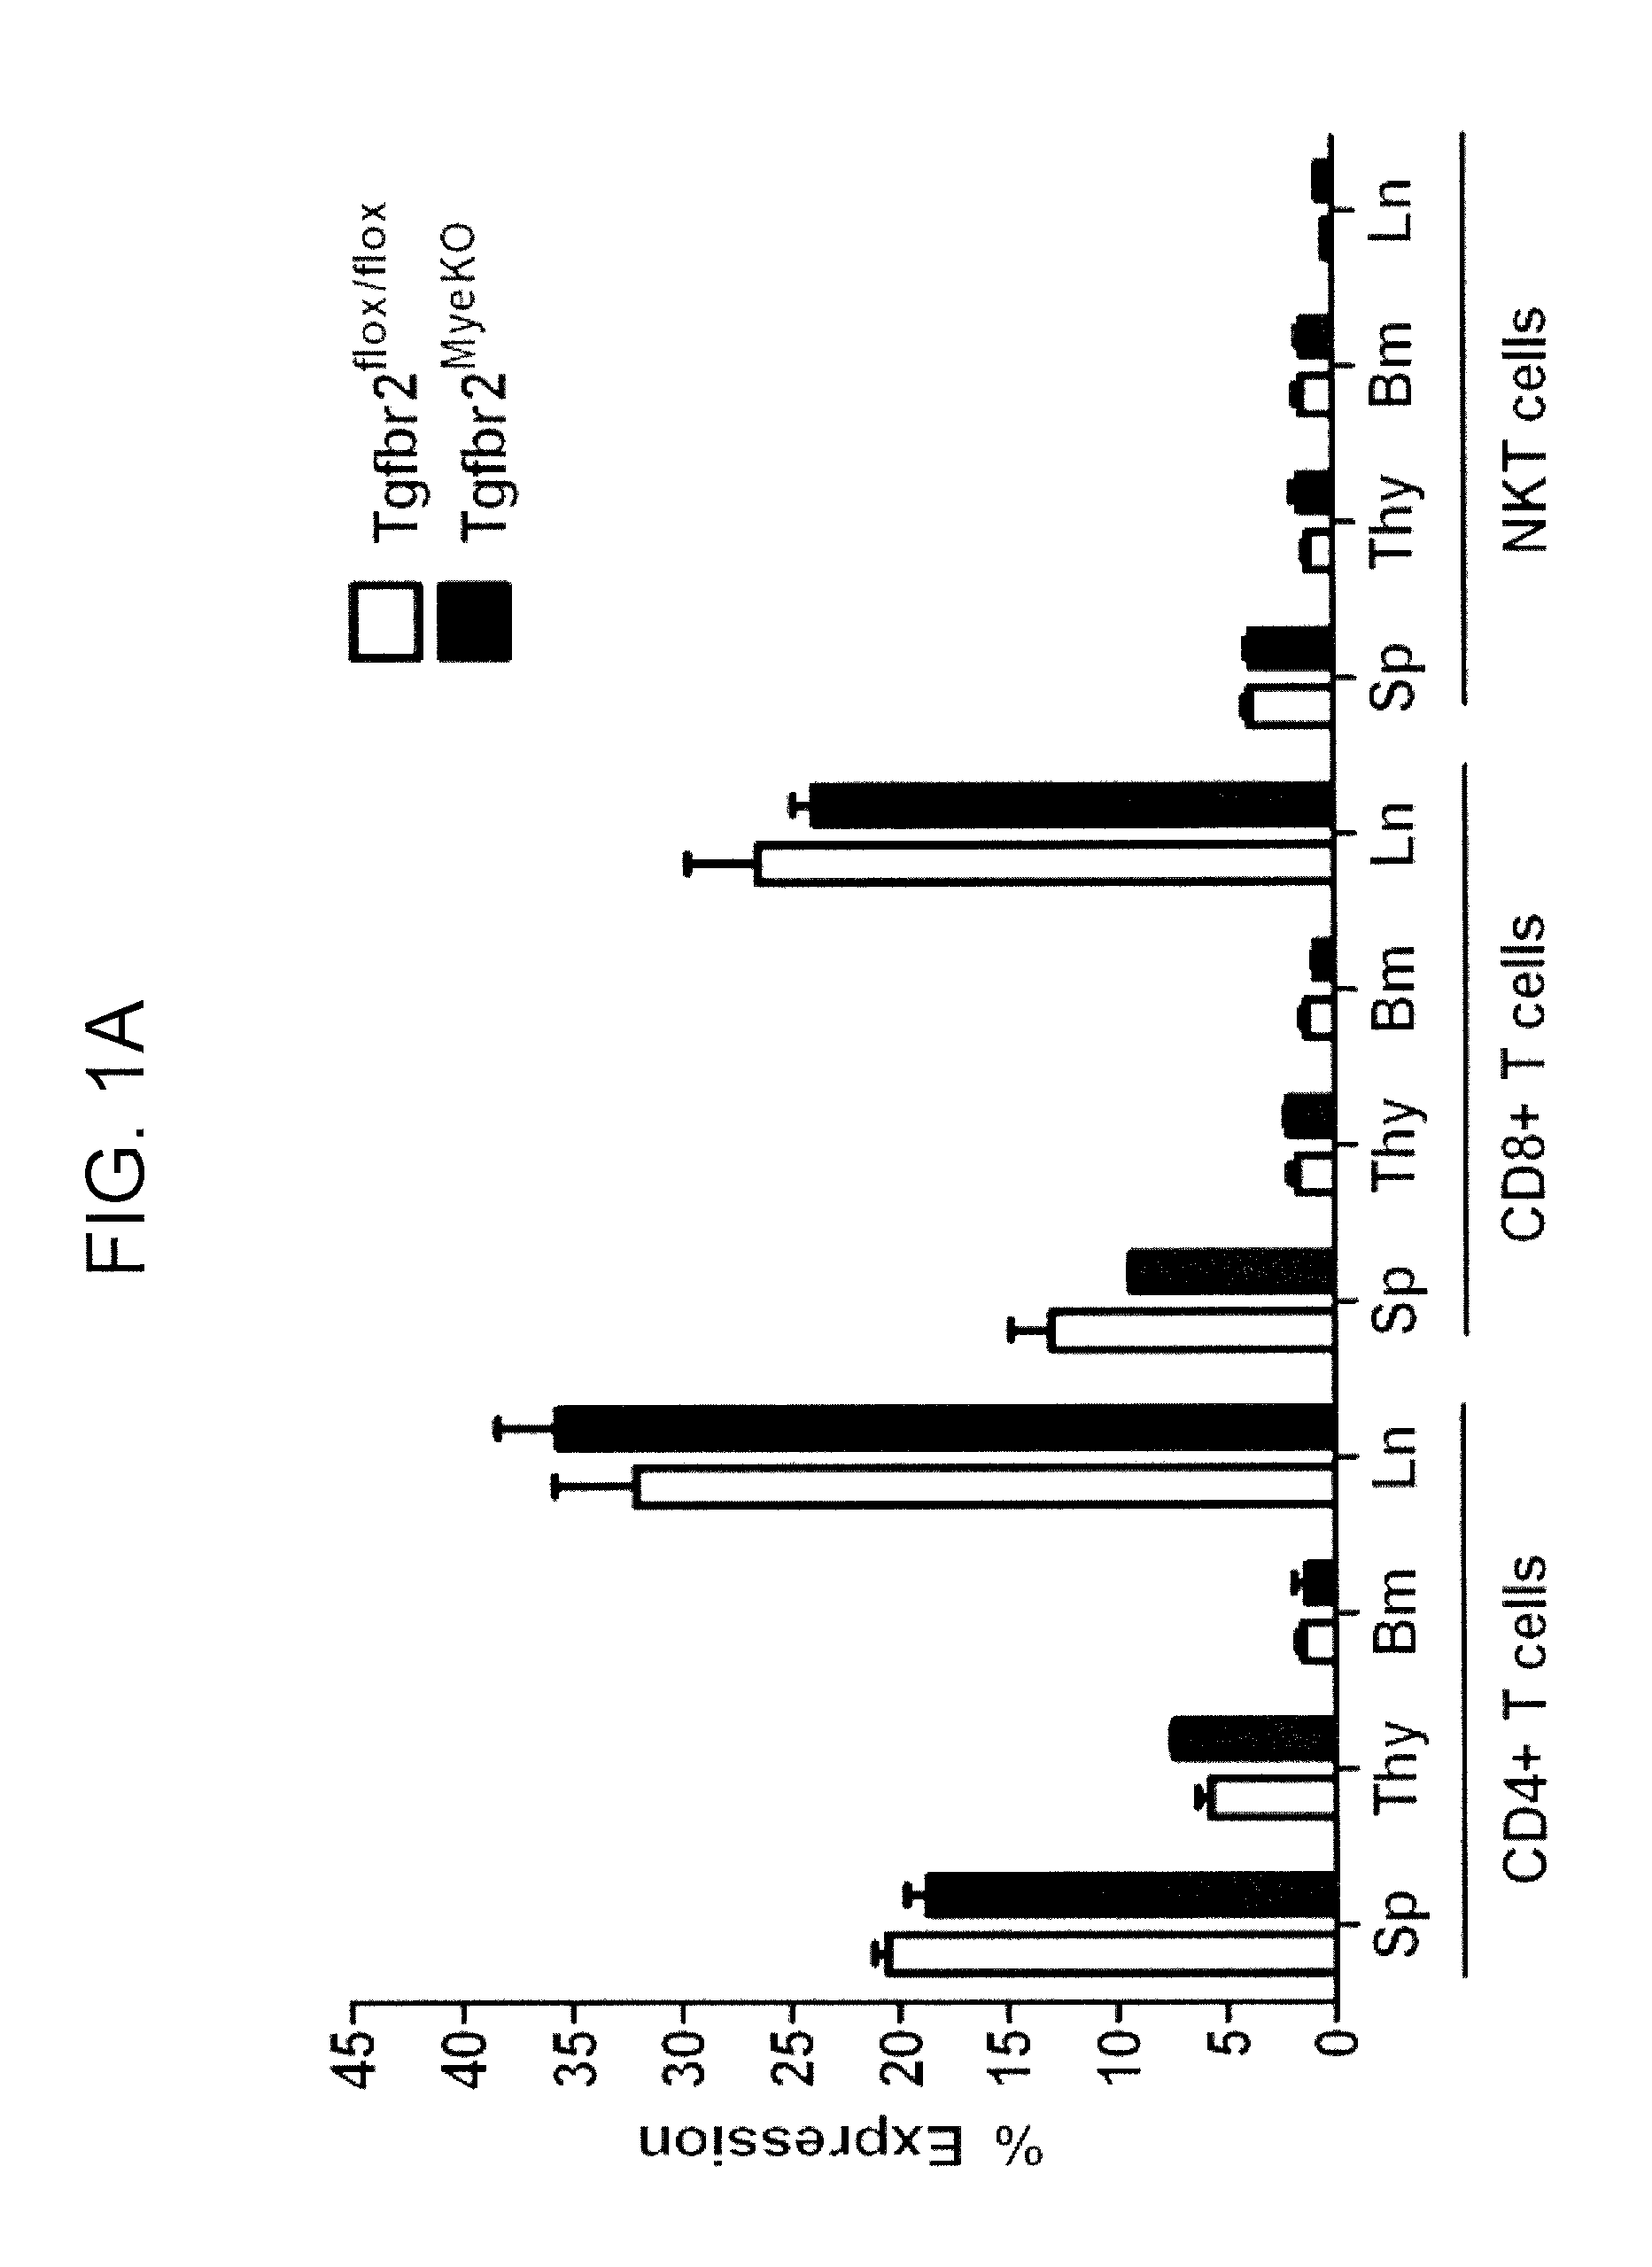 Reduction of TGF beta signaling in myeloid cells in the treatment of cancer